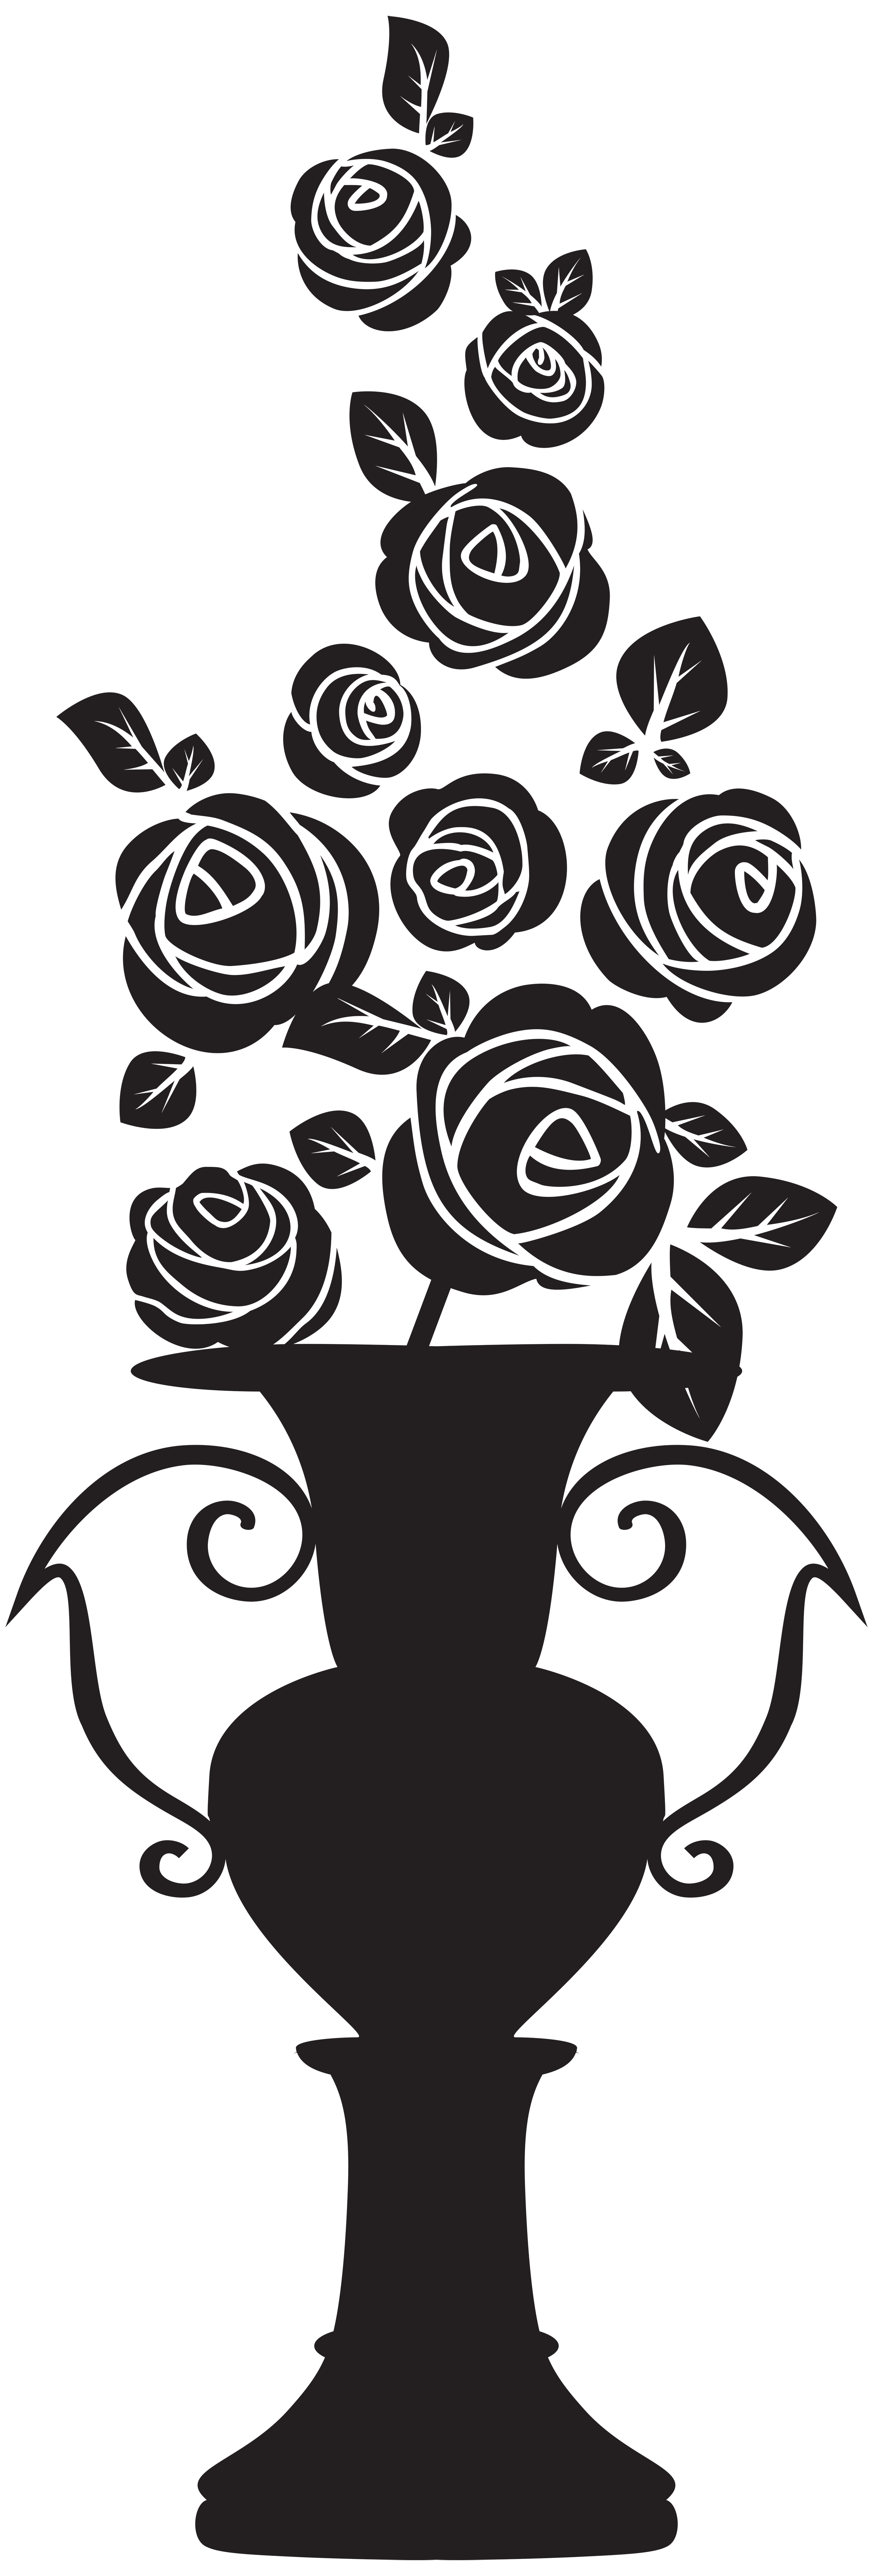 Rose Silhouette Png Transparent Clip Art Image Silhouette Of A Rose Images